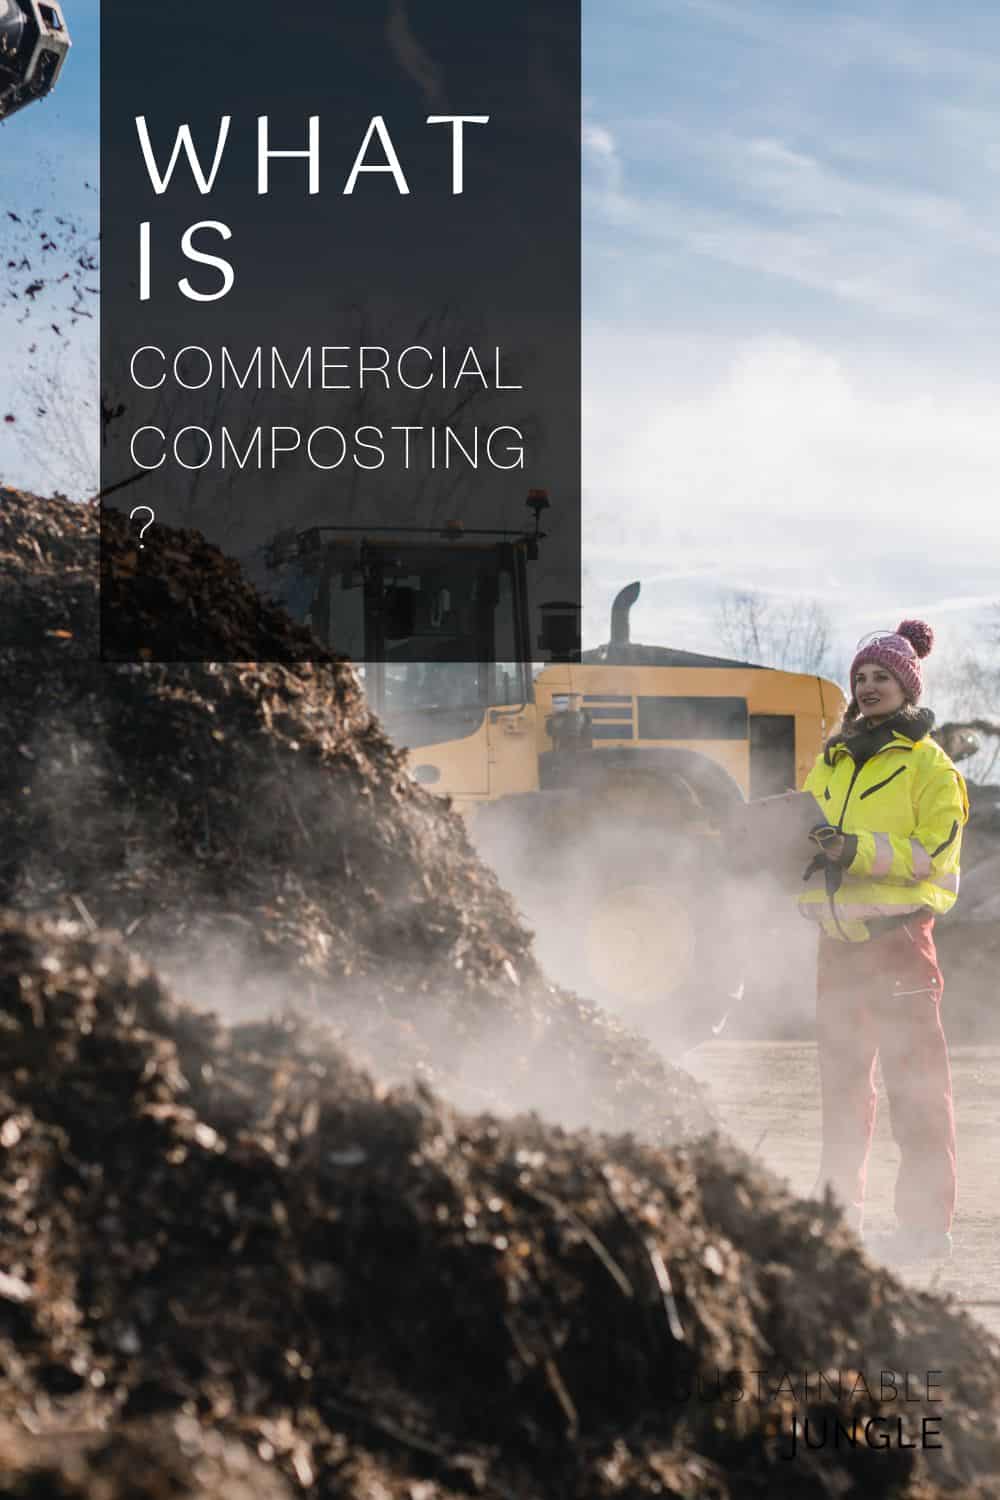 Industrial Dirt Heaps For Good: What is Commercial Composting? Image by kzenon #commercialcomposting #industrialcomposting #whatiscommercialcomposting #commerciallycompostable #industrialcompostingsystems #sustainablejungle